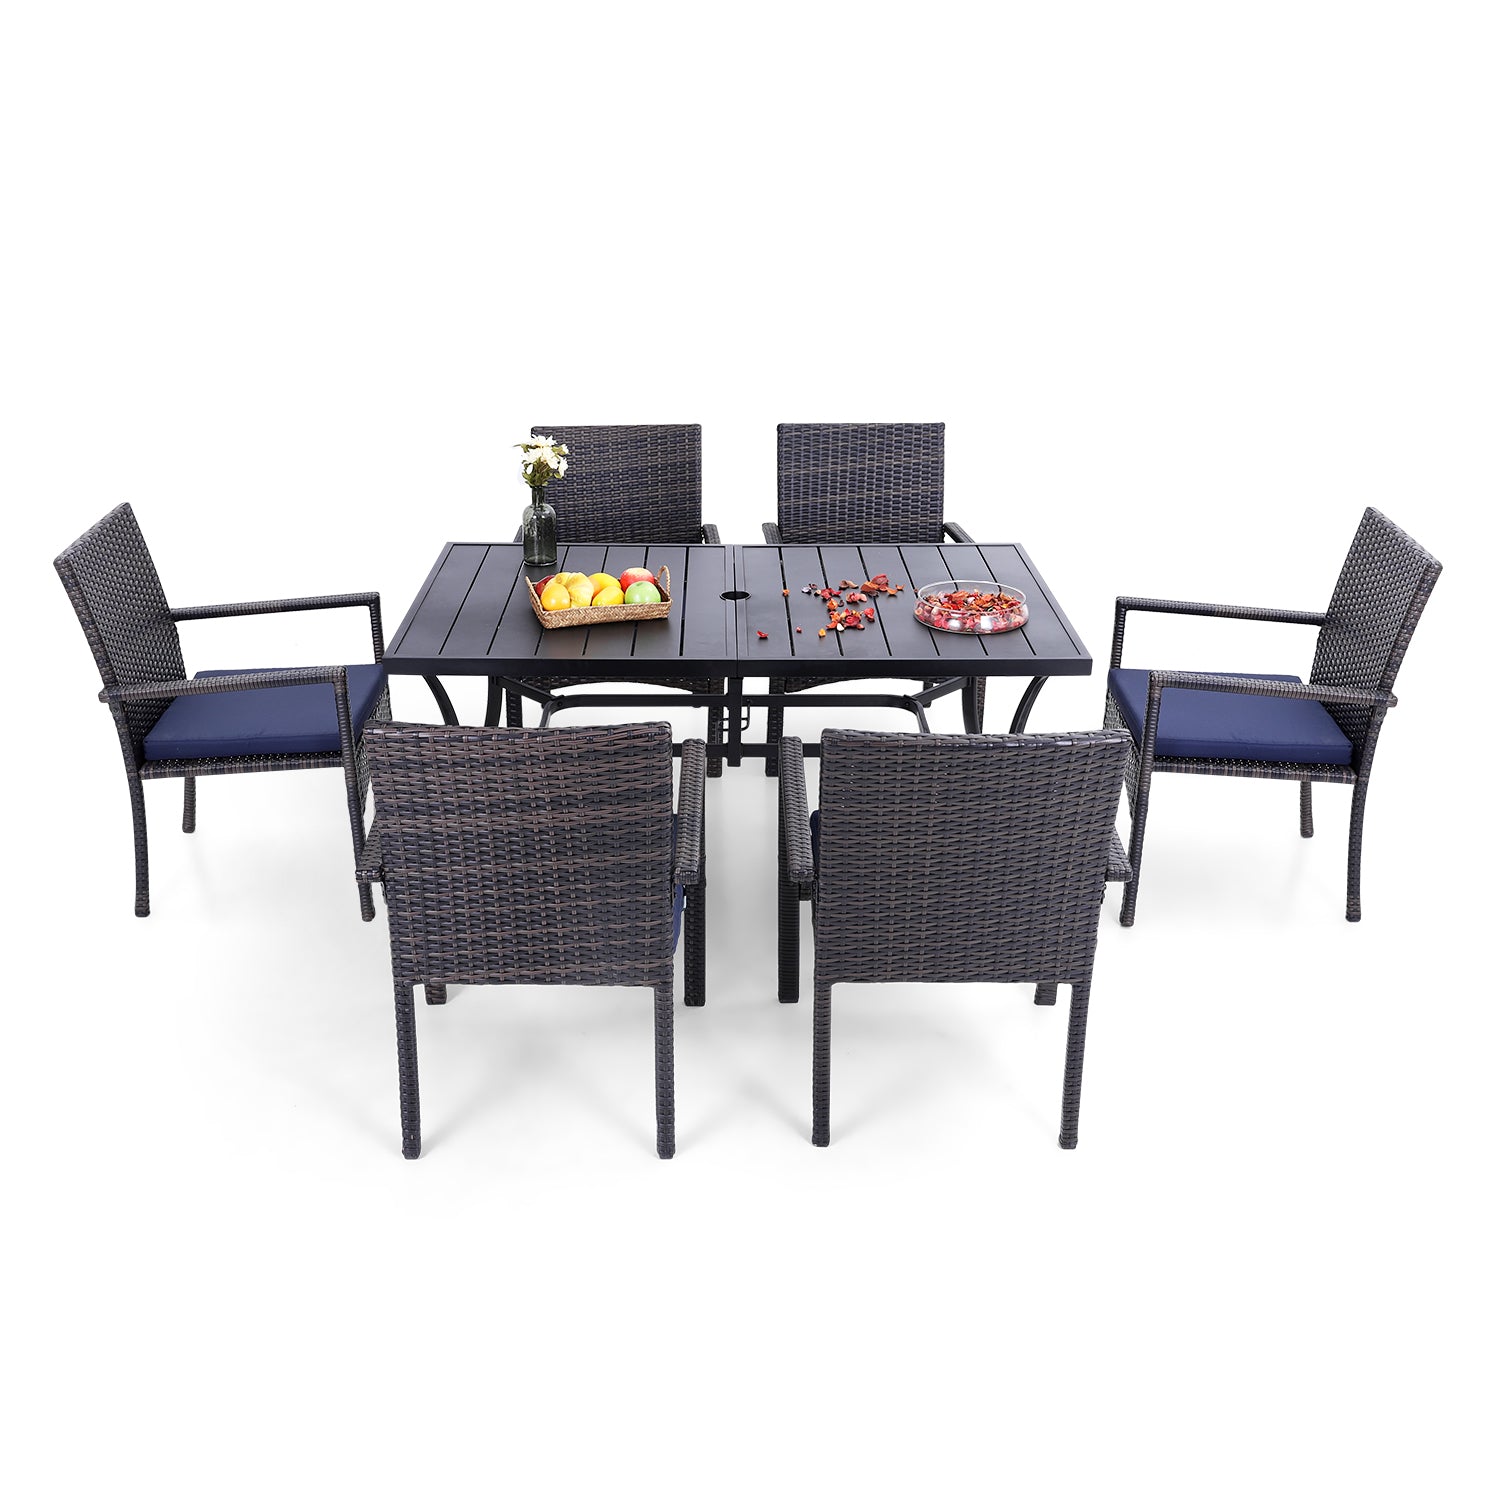 PHI VILLA 7-Piece Rattan Steel Cushioned Patio Chairs & Steel Panel Table Outdoor Dining Set